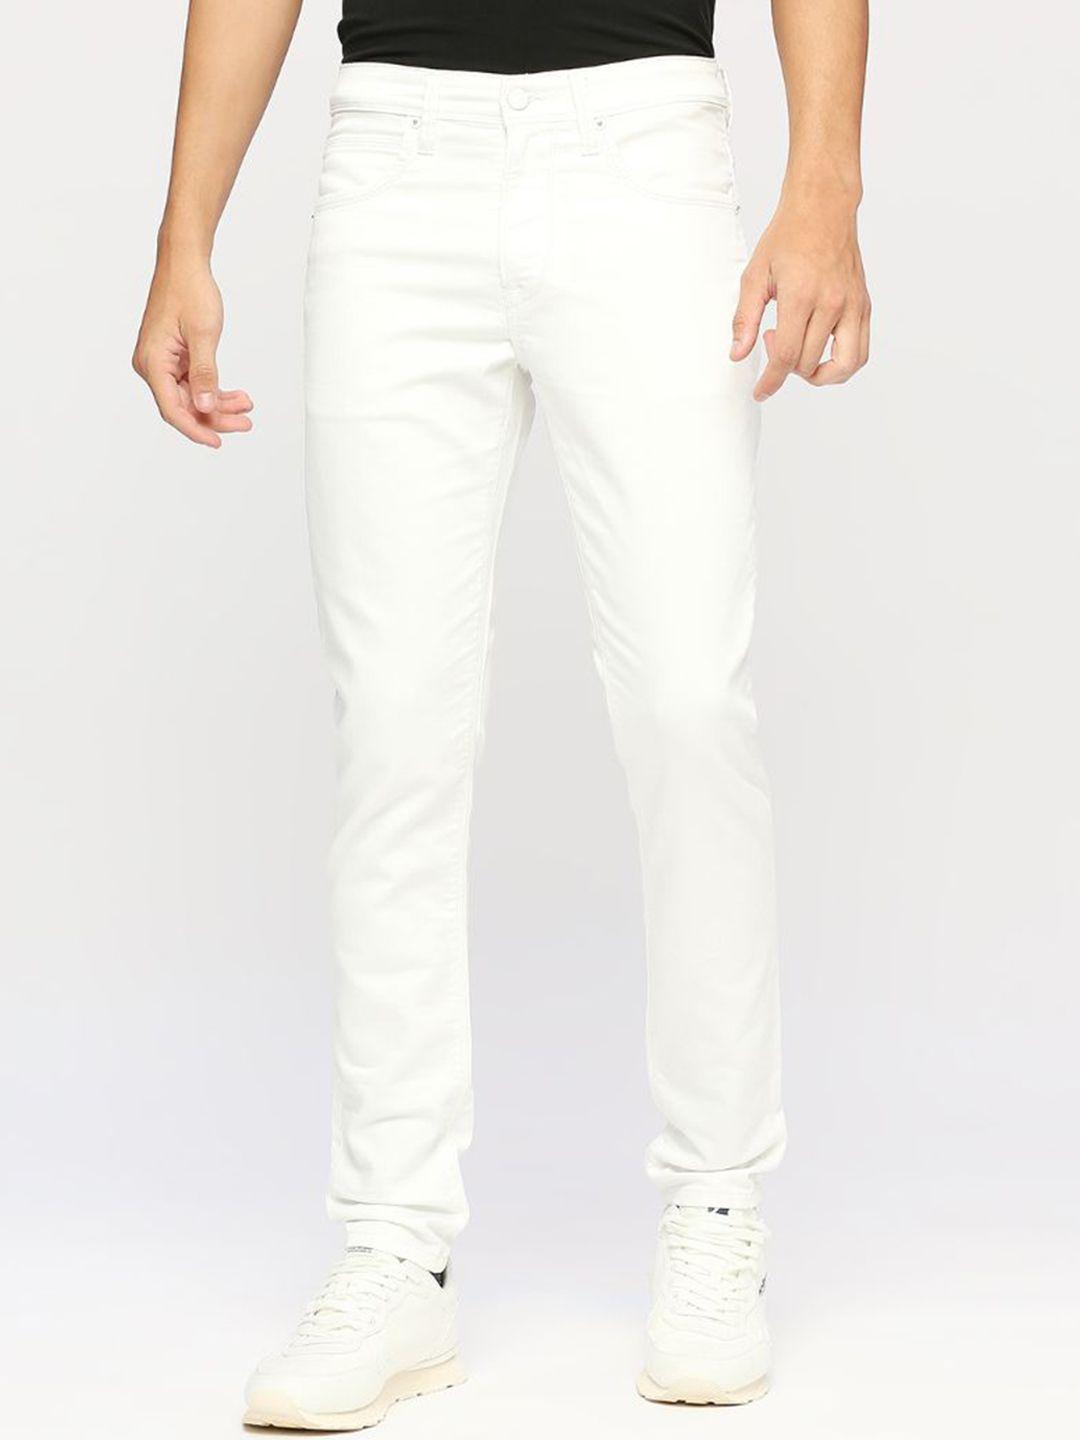 pepe-jeans-men-skinny-fit-mid-rise-light-shade-clean-look-jeans